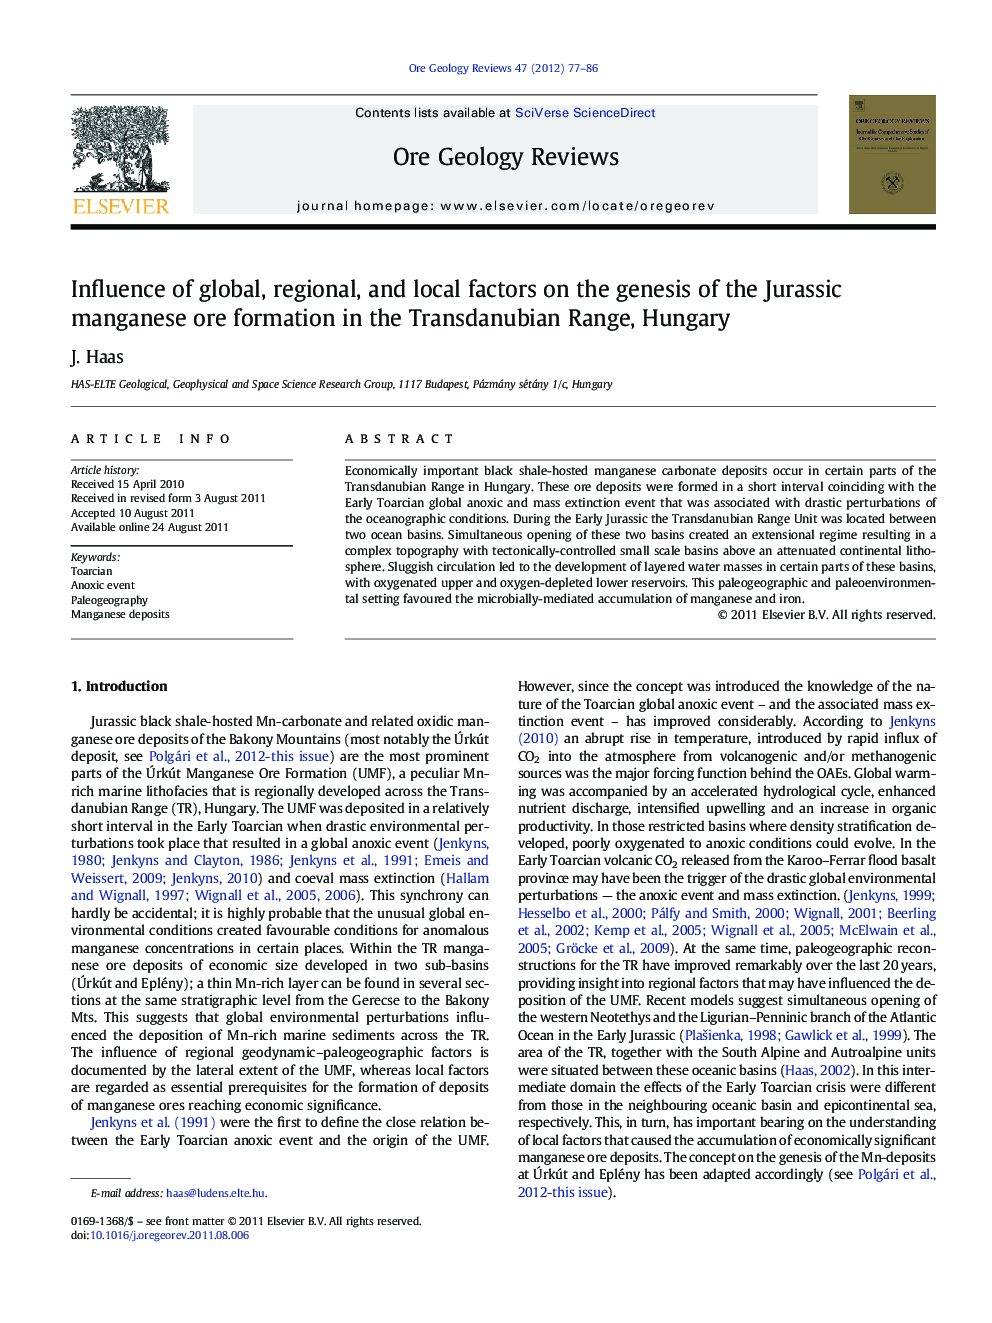 Influence of global, regional, and local factors on the genesis of the Jurassic manganese ore formation in the Transdanubian Range, Hungary